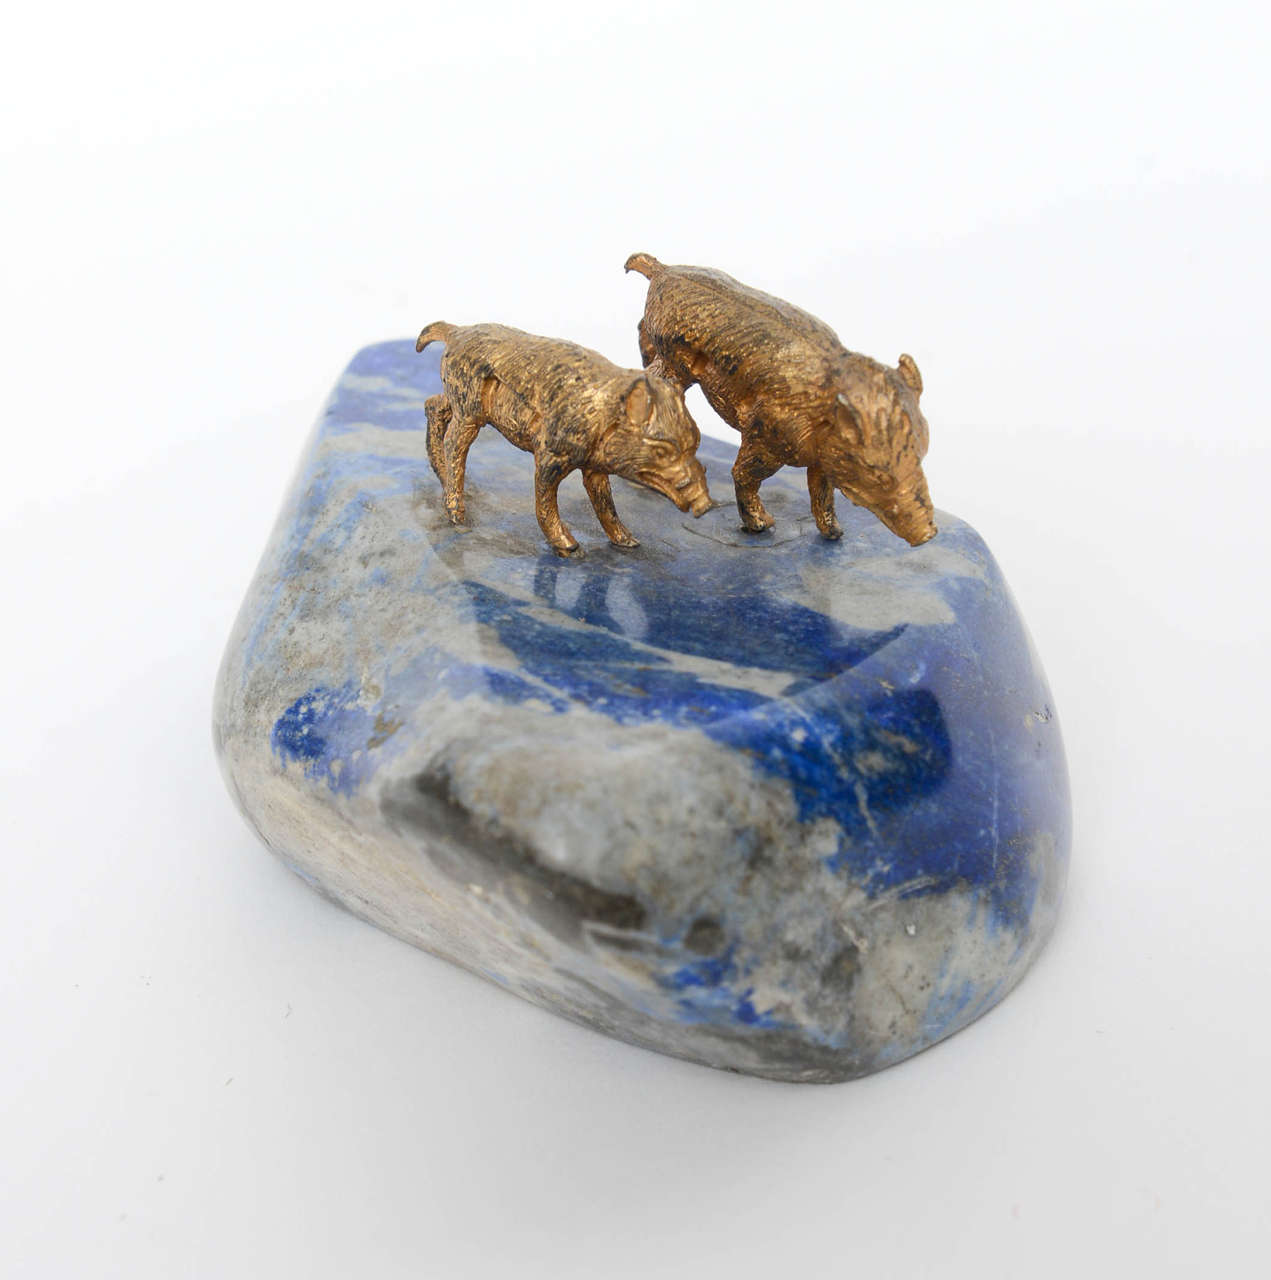 Wonderful miniature pair of bronze boars set on a free-form, polished piece of lapis lazuli stone. Ideal as a paperweight

Originally $350.00

Lapis in the form of two dragons with ball and stand, original condition; Lapis lazuli (sometimes